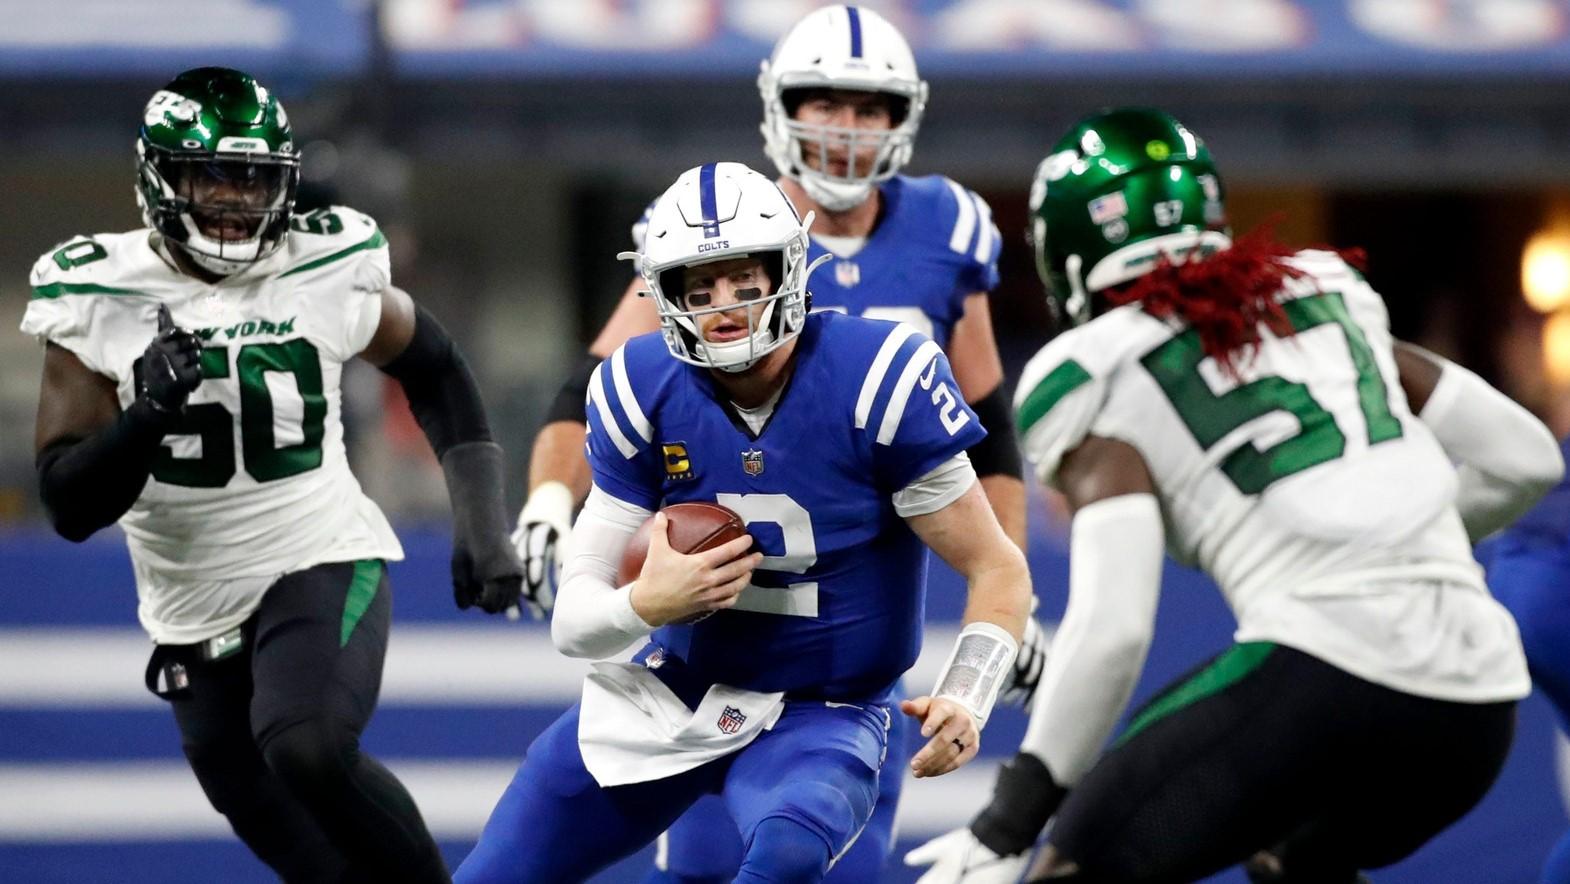 Indianapolis Colts quarterback Carson Wentz (2) rushes the ball Thursday, Nov. 4, 2021, during a game against the New York Jets at Lucas Oil Stadium in Indianapolis. / Christine Tannous/IndyStar / USA TODAY NETWORK